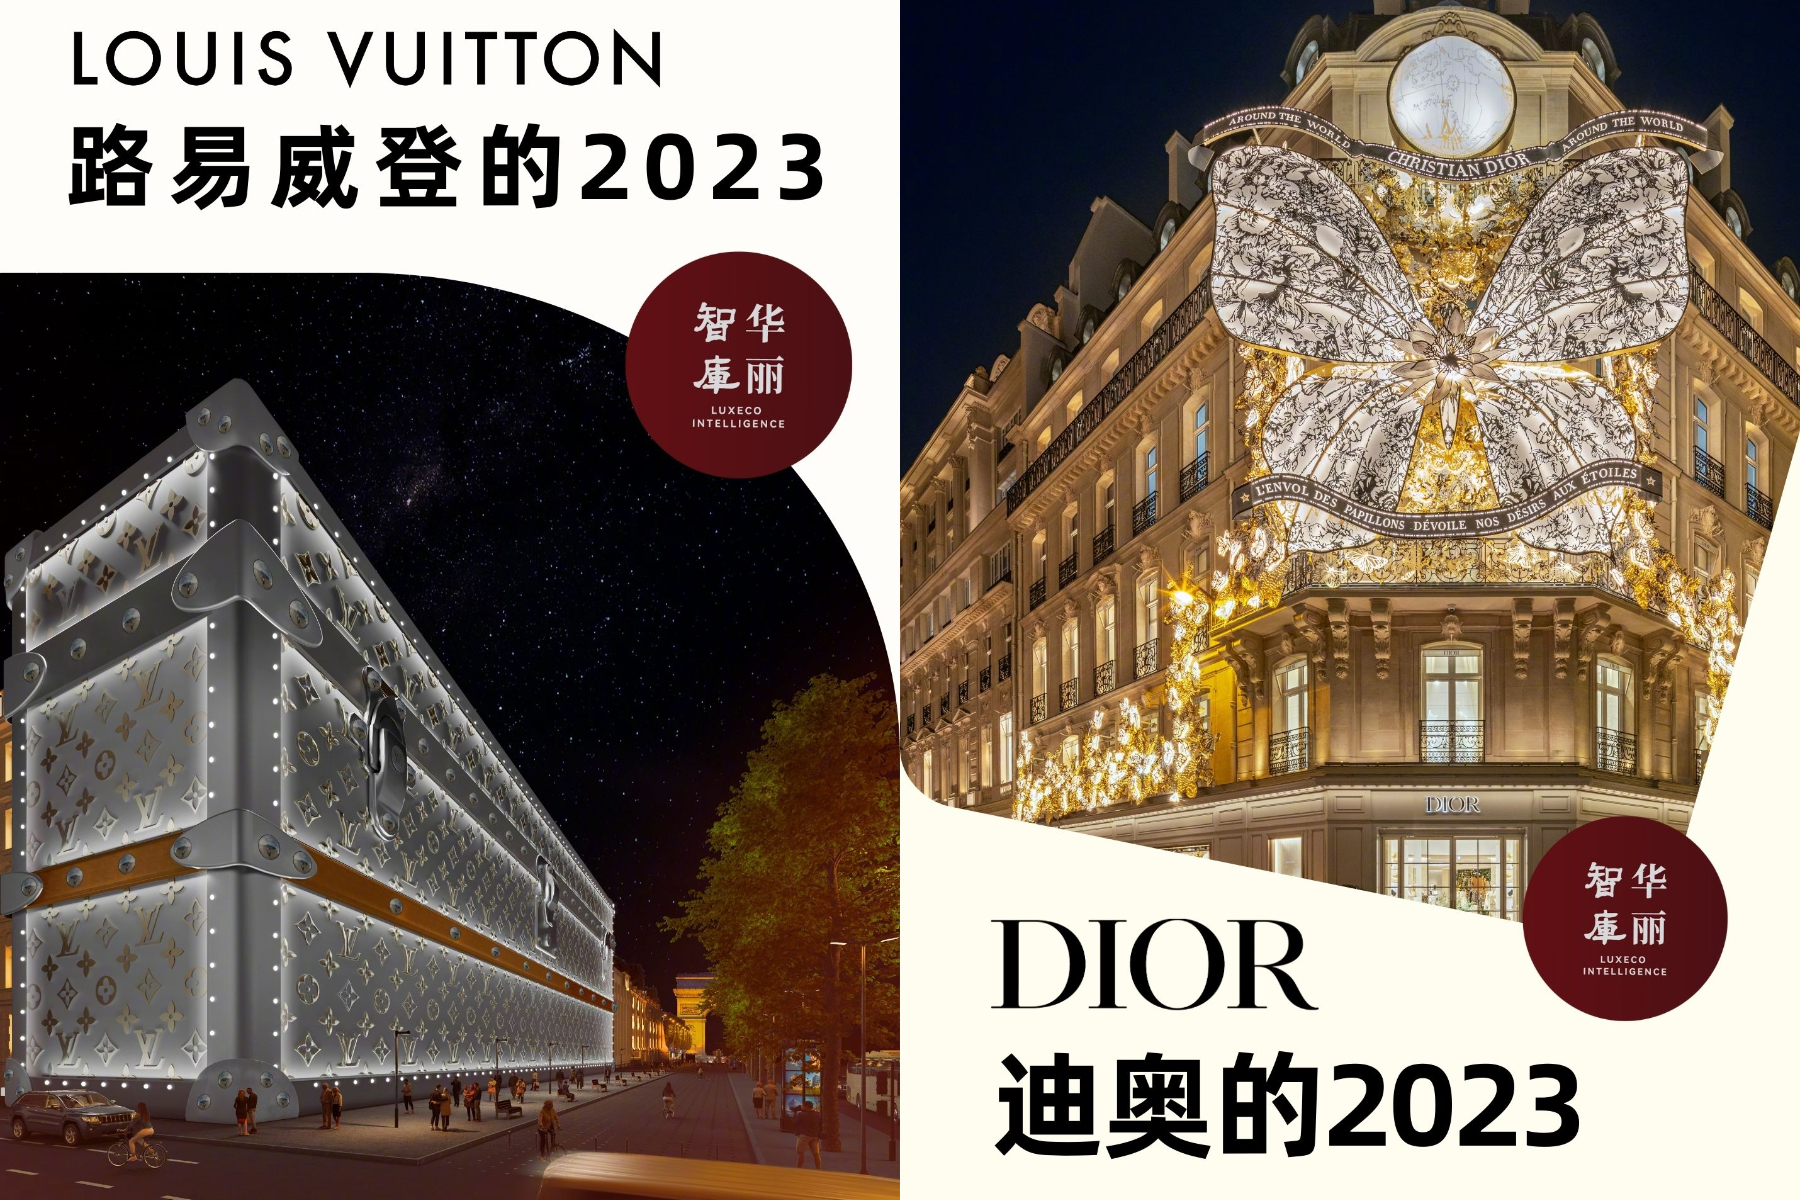 Exclusive | Louis Vuitton vs. Dior: What Are the Differences and Similarities in Brand Development Focus?